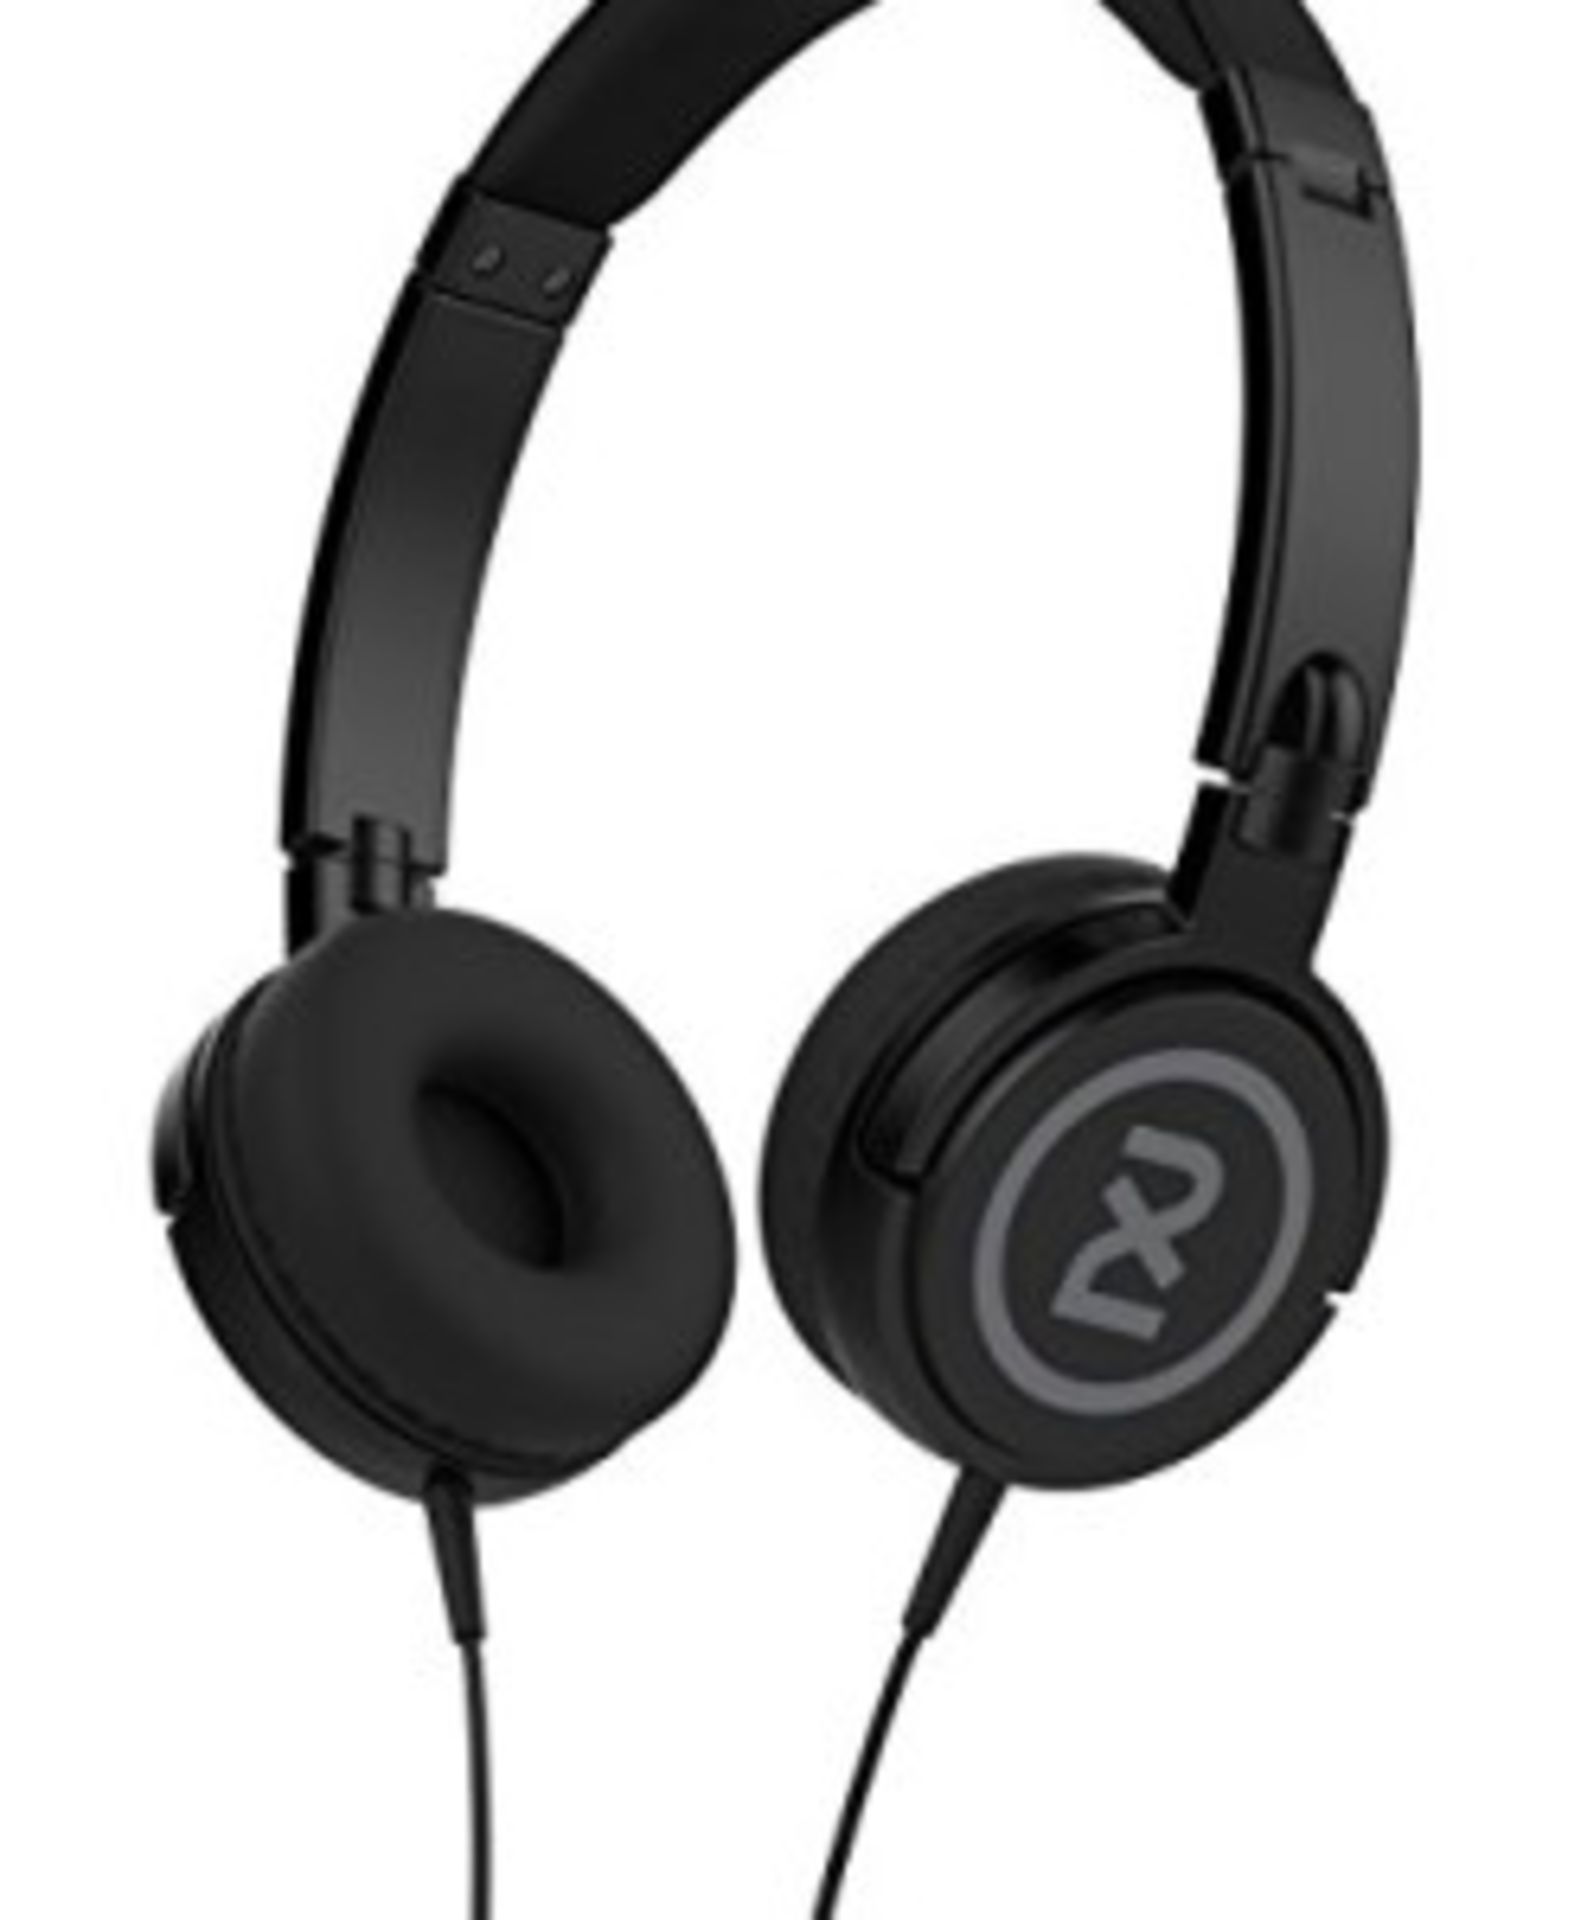 V *TRADE QTY* Brand New Skullcandy 2XL Shakedown Headphones X 5 YOUR BID PRICE TO BE MULTIPLIED BY